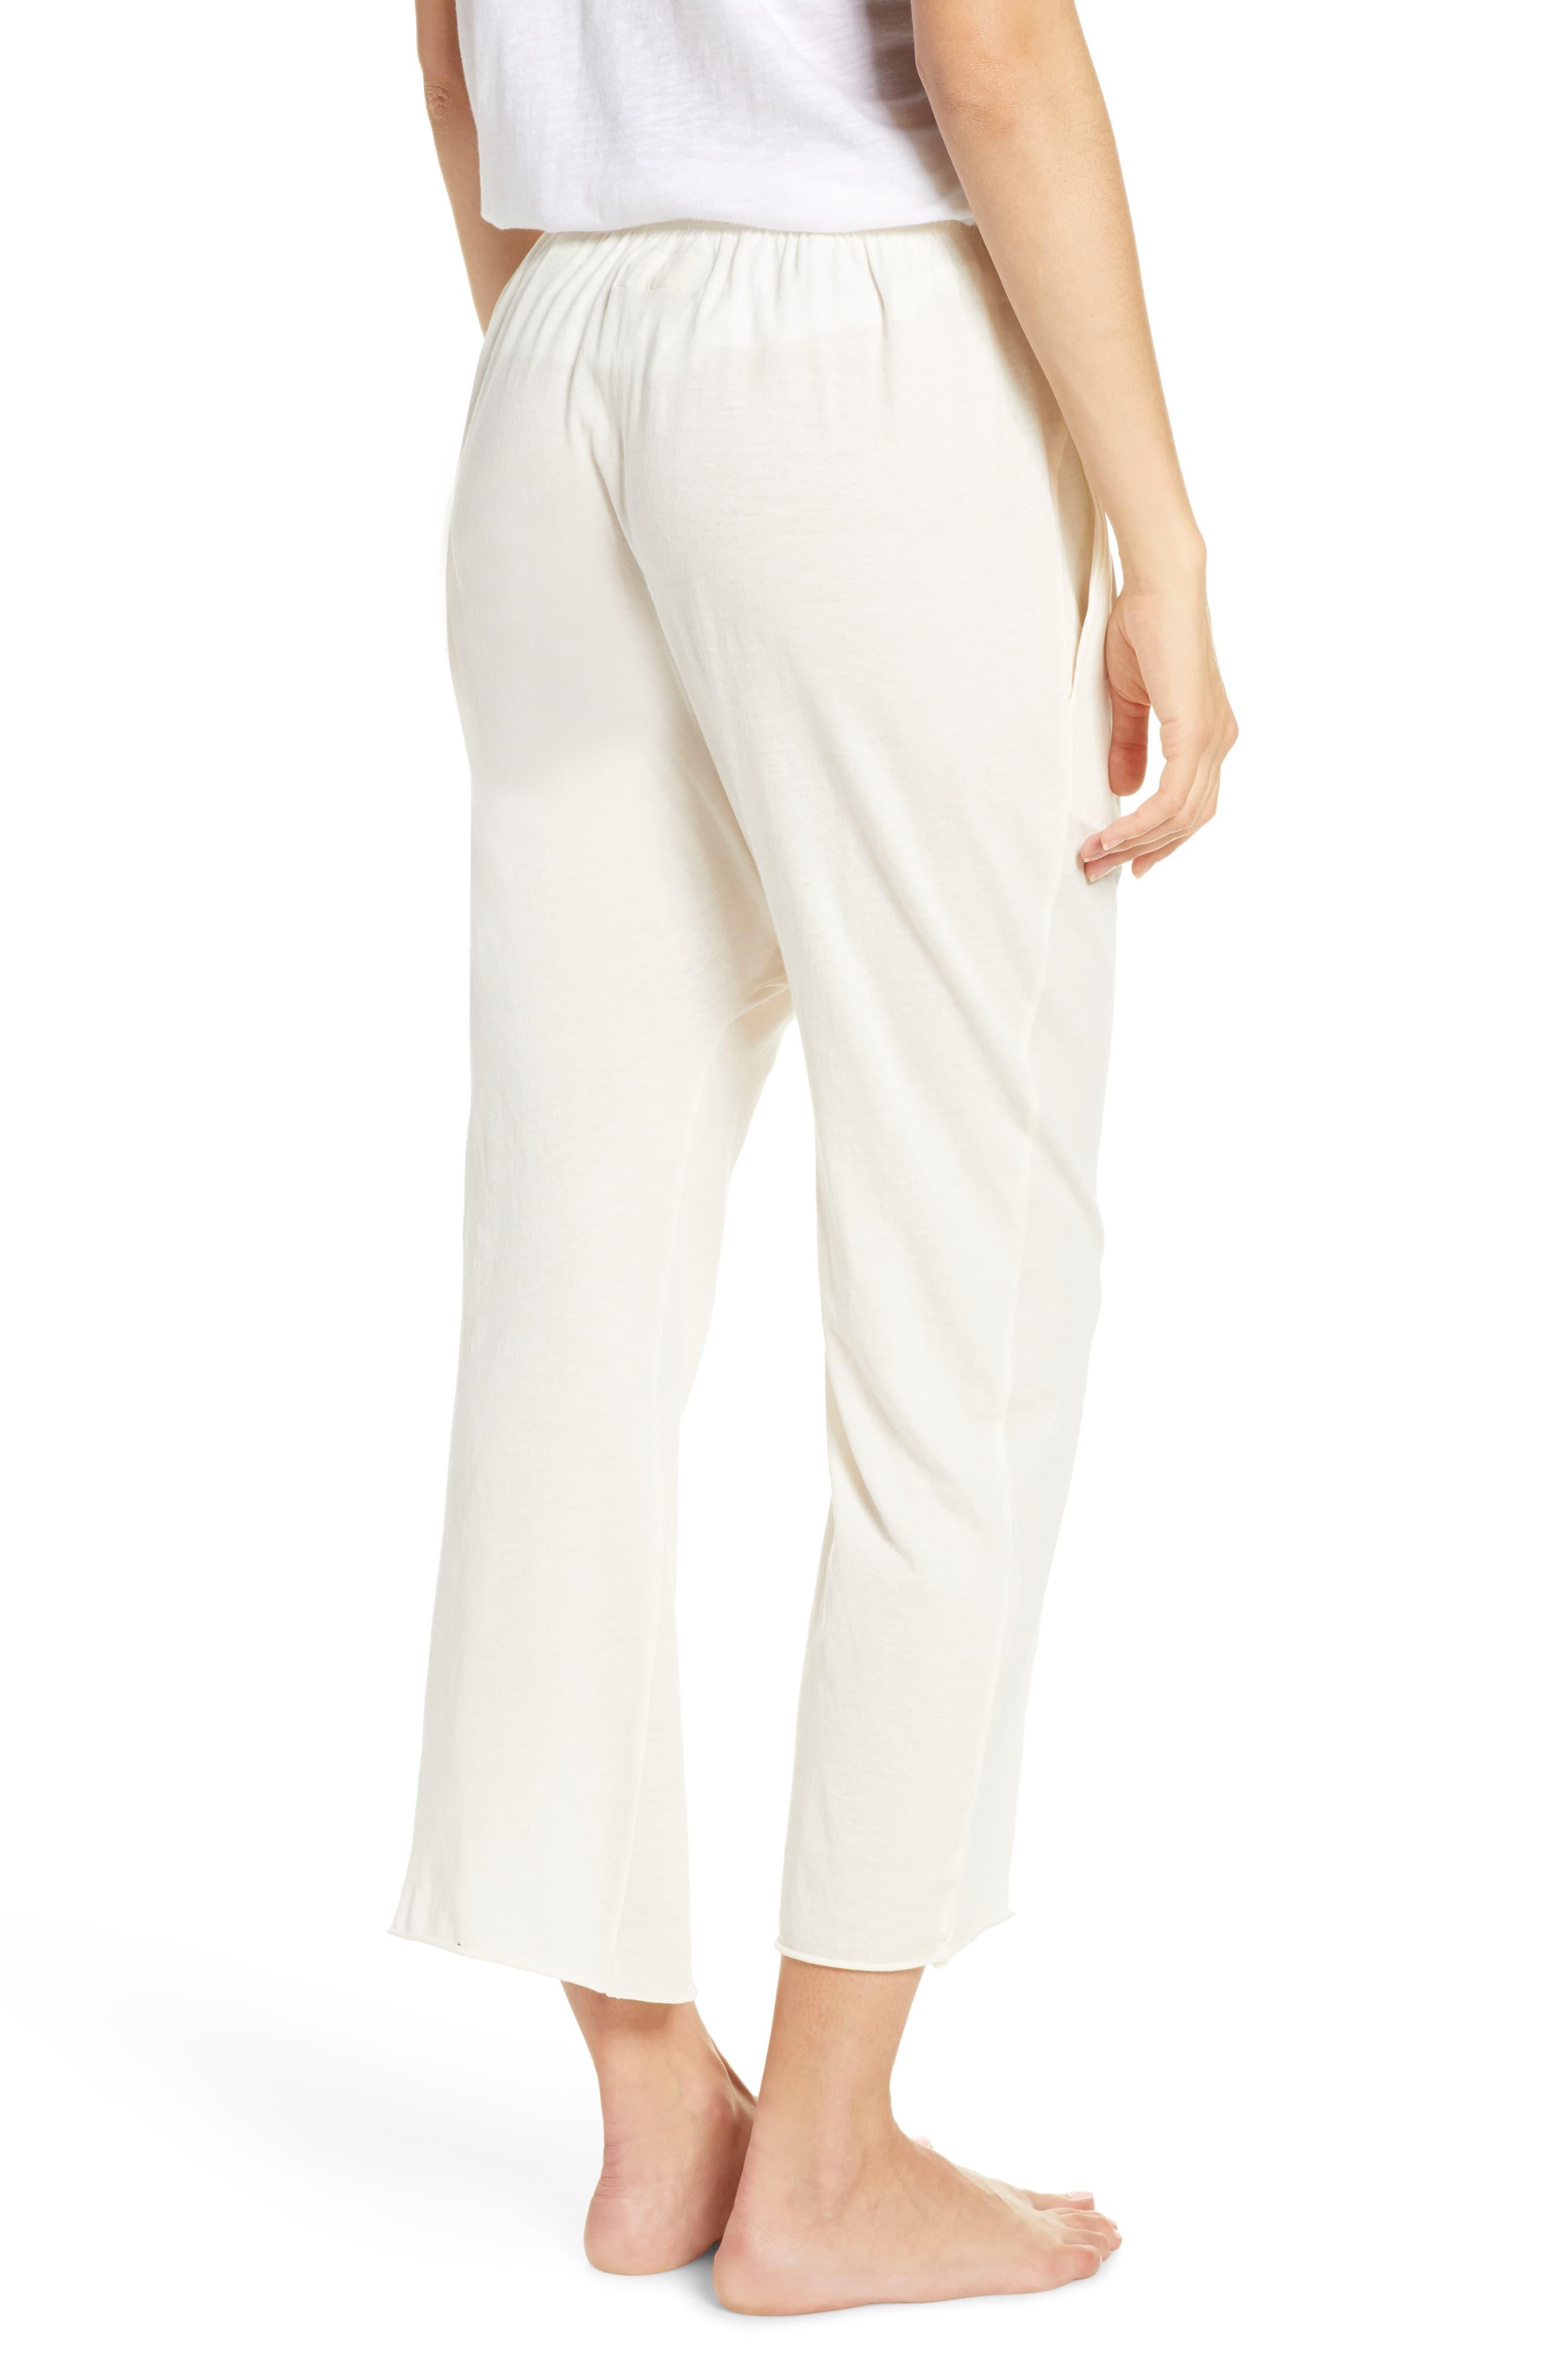 The Great The Lounge Cotton Crop Pants in Washed White (White) - Lyst